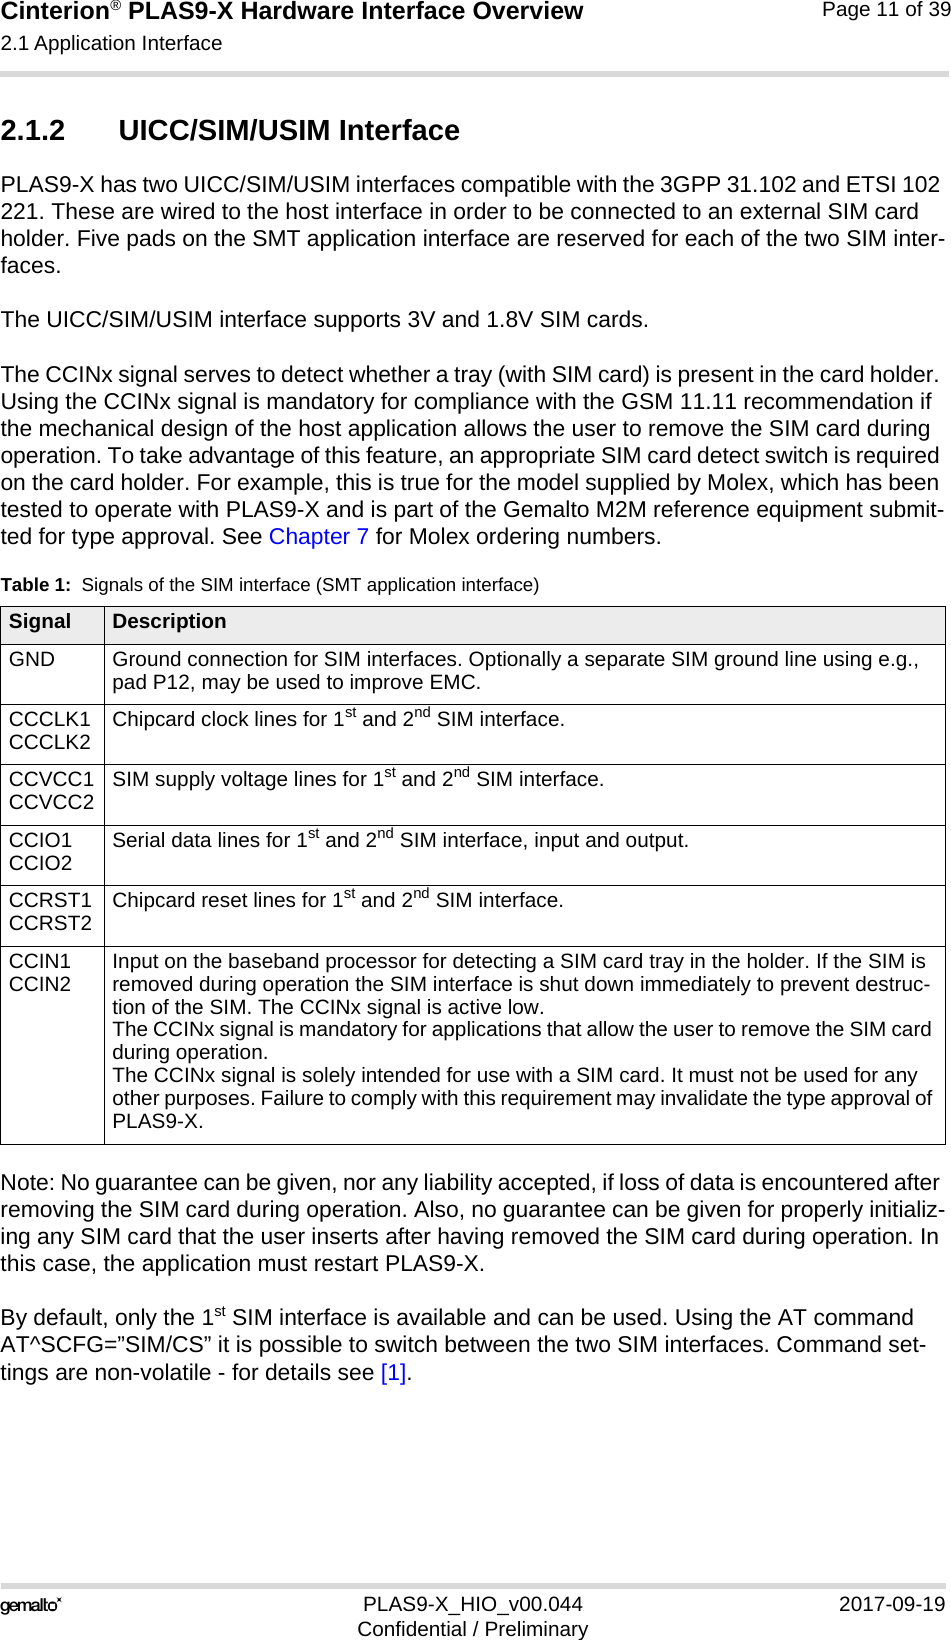 Cinterion® PLAS9-X Hardware Interface Overview2.1 Application Interface22PLAS9-X_HIO_v00.044 2017-09-19Confidential / PreliminaryPage 11 of 392.1.2 UICC/SIM/USIM InterfacePLAS9-X has two UICC/SIM/USIM interfaces compatible with the 3GPP 31.102 and ETSI 102 221. These are wired to the host interface in order to be connected to an external SIM card holder. Five pads on the SMT application interface are reserved for each of the two SIM inter-faces.The UICC/SIM/USIM interface supports 3V and 1.8V SIM cards.The CCINx signal serves to detect whether a tray (with SIM card) is present in the card holder. Using the CCINx signal is mandatory for compliance with the GSM 11.11 recommendation if the mechanical design of the host application allows the user to remove the SIM card during operation. To take advantage of this feature, an appropriate SIM card detect switch is required on the card holder. For example, this is true for the model supplied by Molex, which has been tested to operate with PLAS9-X and is part of the Gemalto M2M reference equipment submit-ted for type approval. See Chapter 7 for Molex ordering numbers.Note: No guarantee can be given, nor any liability accepted, if loss of data is encountered after removing the SIM card during operation. Also, no guarantee can be given for properly initializ-ing any SIM card that the user inserts after having removed the SIM card during operation. In this case, the application must restart PLAS9-X.By default, only the 1st SIM interface is available and can be used. Using the AT command AT^SCFG=”SIM/CS” it is possible to switch between the two SIM interfaces. Command set-tings are non-volatile - for details see [1].Table 1:  Signals of the SIM interface (SMT application interface)Signal DescriptionGND Ground connection for SIM interfaces. Optionally a separate SIM ground line using e.g., pad P12, may be used to improve EMC.CCCLK1CCCLK2 Chipcard clock lines for 1st and 2nd SIM interface.CCVCC1CCVCC2 SIM supply voltage lines for 1st and 2nd SIM interface.CCIO1CCIO2 Serial data lines for 1st and 2nd SIM interface, input and output.CCRST1CCRST2 Chipcard reset lines for 1st and 2nd SIM interface.CCIN1CCIN2 Input on the baseband processor for detecting a SIM card tray in the holder. If the SIM is removed during operation the SIM interface is shut down immediately to prevent destruc-tion of the SIM. The CCINx signal is active low.The CCINx signal is mandatory for applications that allow the user to remove the SIM card during operation. The CCINx signal is solely intended for use with a SIM card. It must not be used for any other purposes. Failure to comply with this requirement may invalidate the type approval of PLAS9-X.